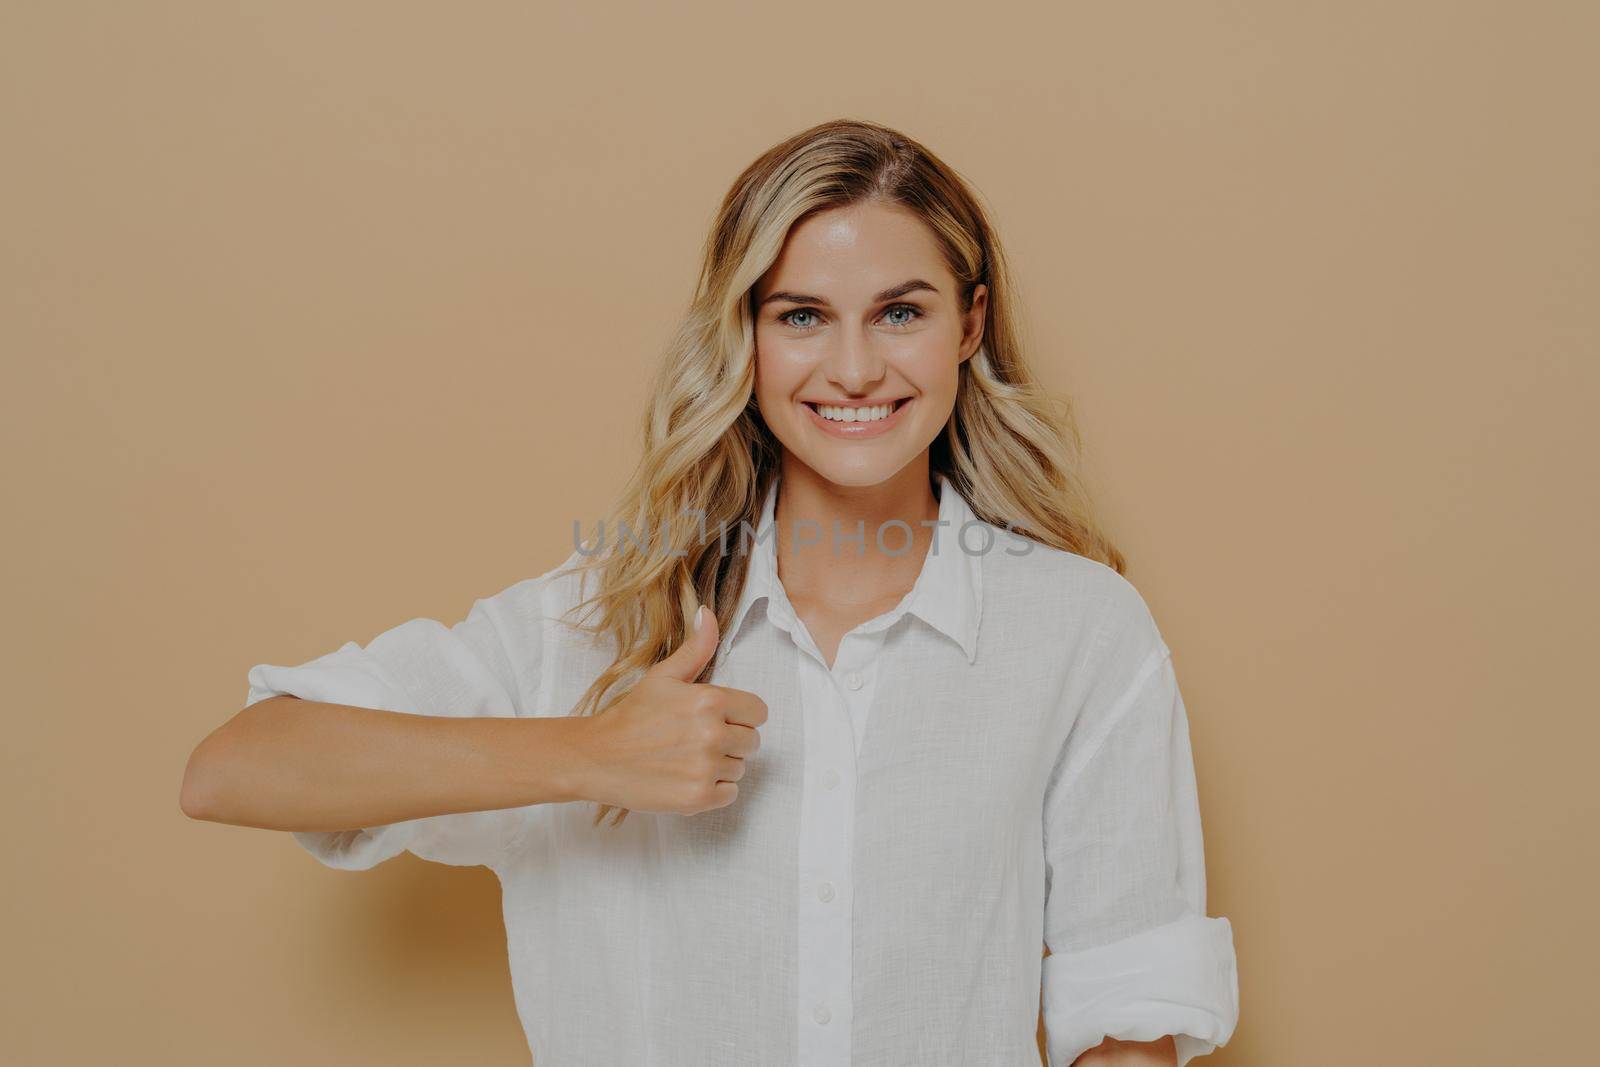 Achieving goals. Portrait of positive young woman with broad smile showing thumb up gesture with hand while posing in studio against beige wall, looking at camera with happy expression. Body language